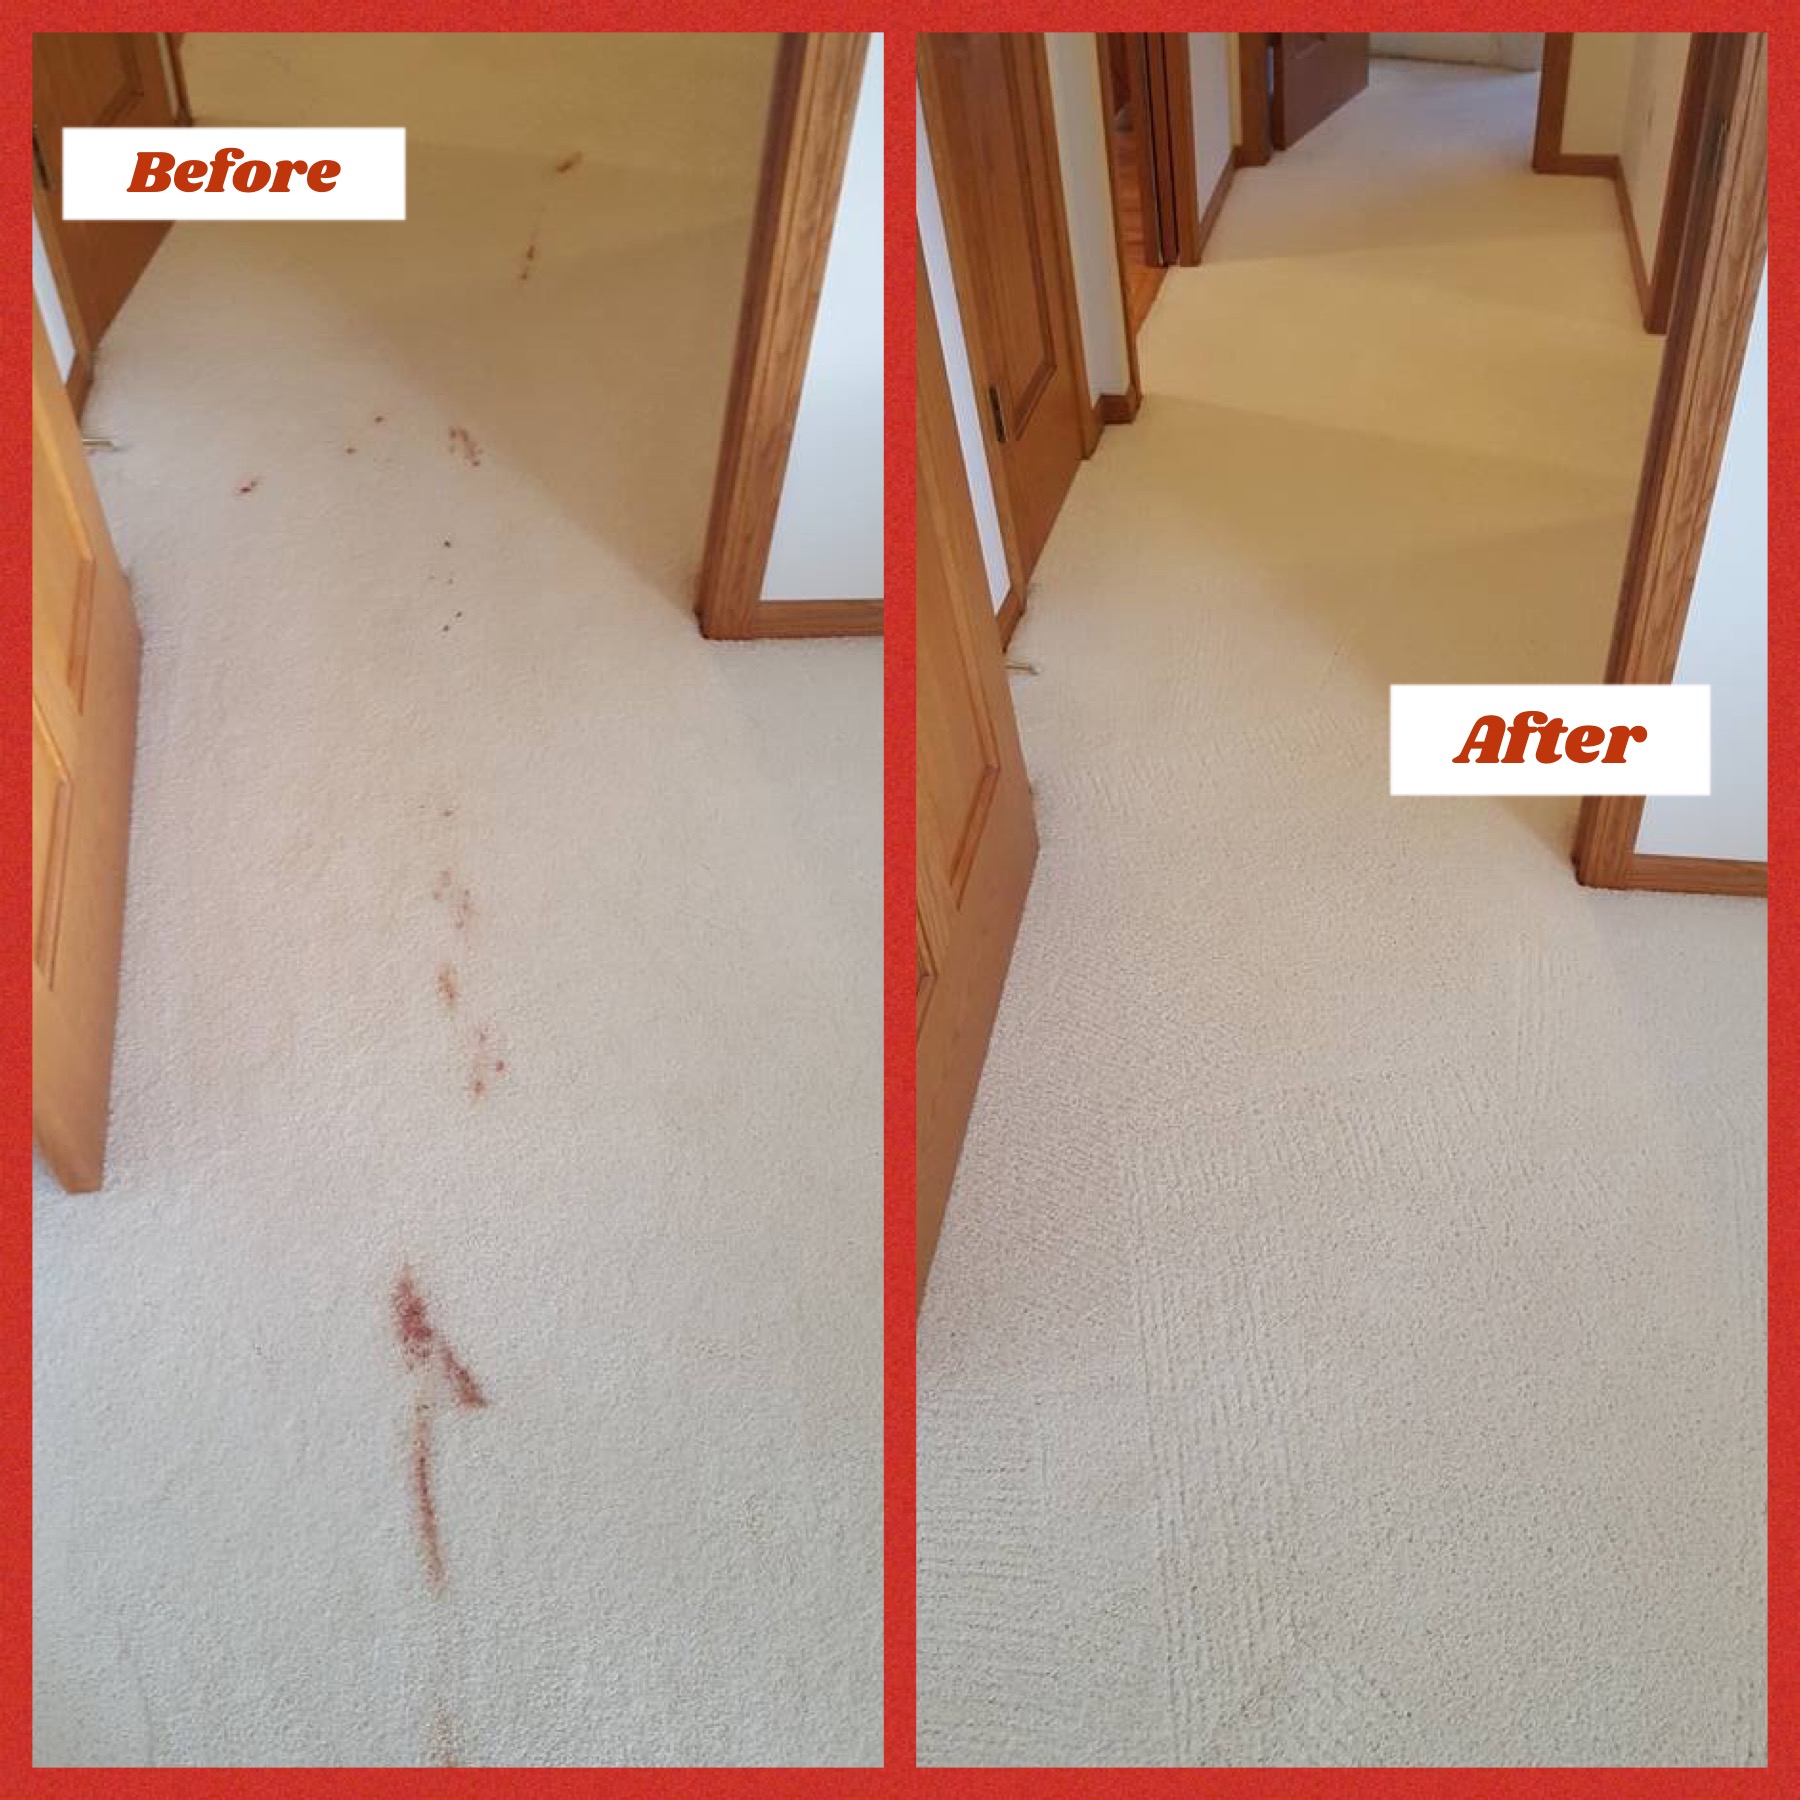 Specialty Stain Removal Service by Chem-Dry